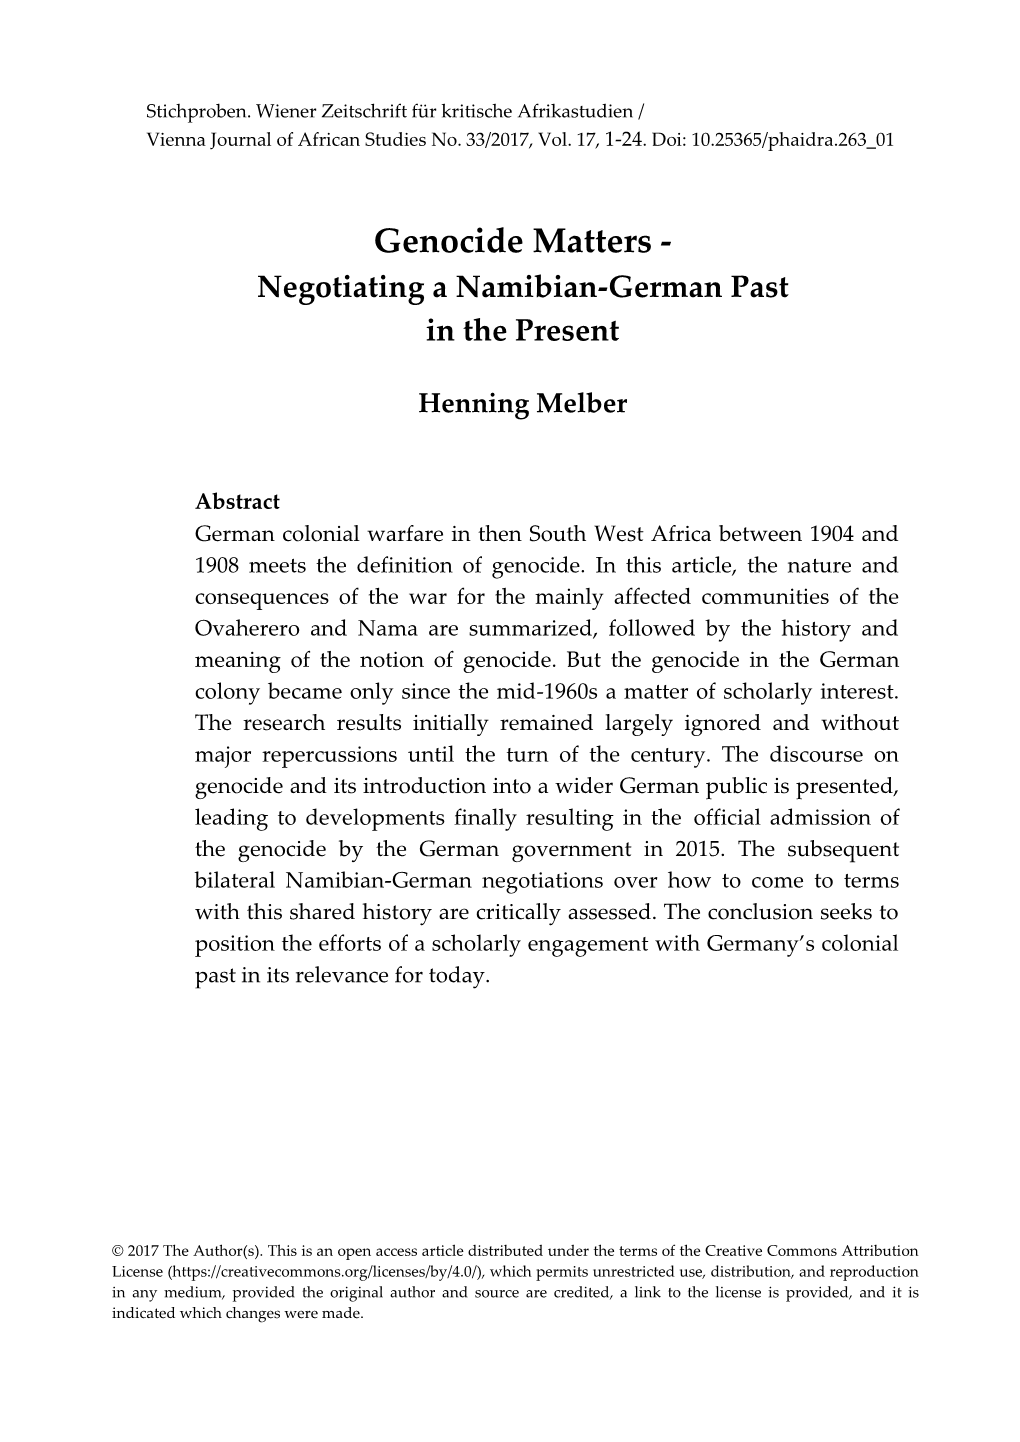 Genocide Matters - Negotiating a Namibian-German Past in the Present